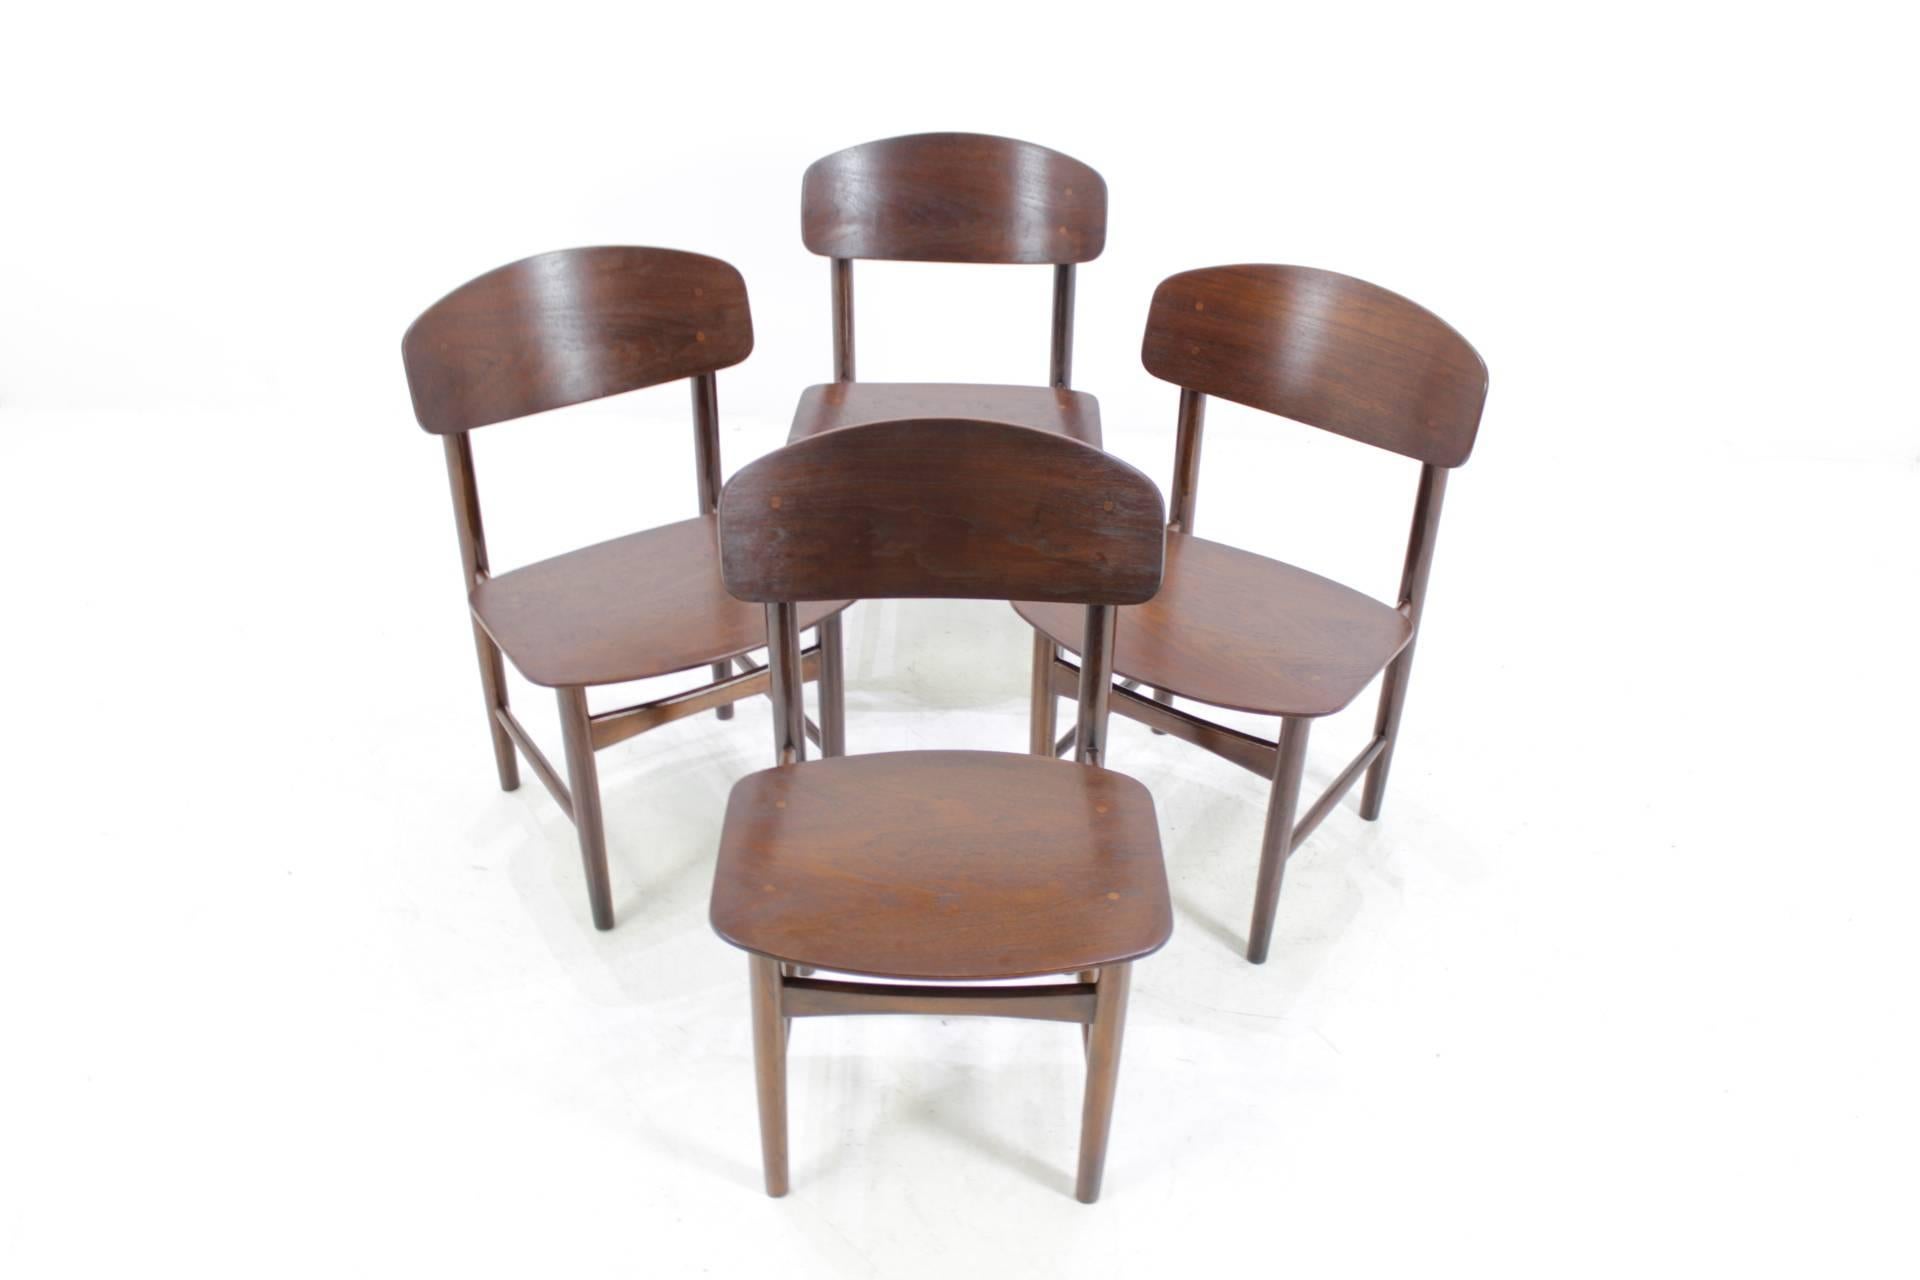 Set of four set of four Borge Mogensen dining chairs made by Soborg Mobler Denmark in 1950s.
The frame are made from stained oak and seats and backrests from plywood with teak veneer.
All items has been carefully renovated.